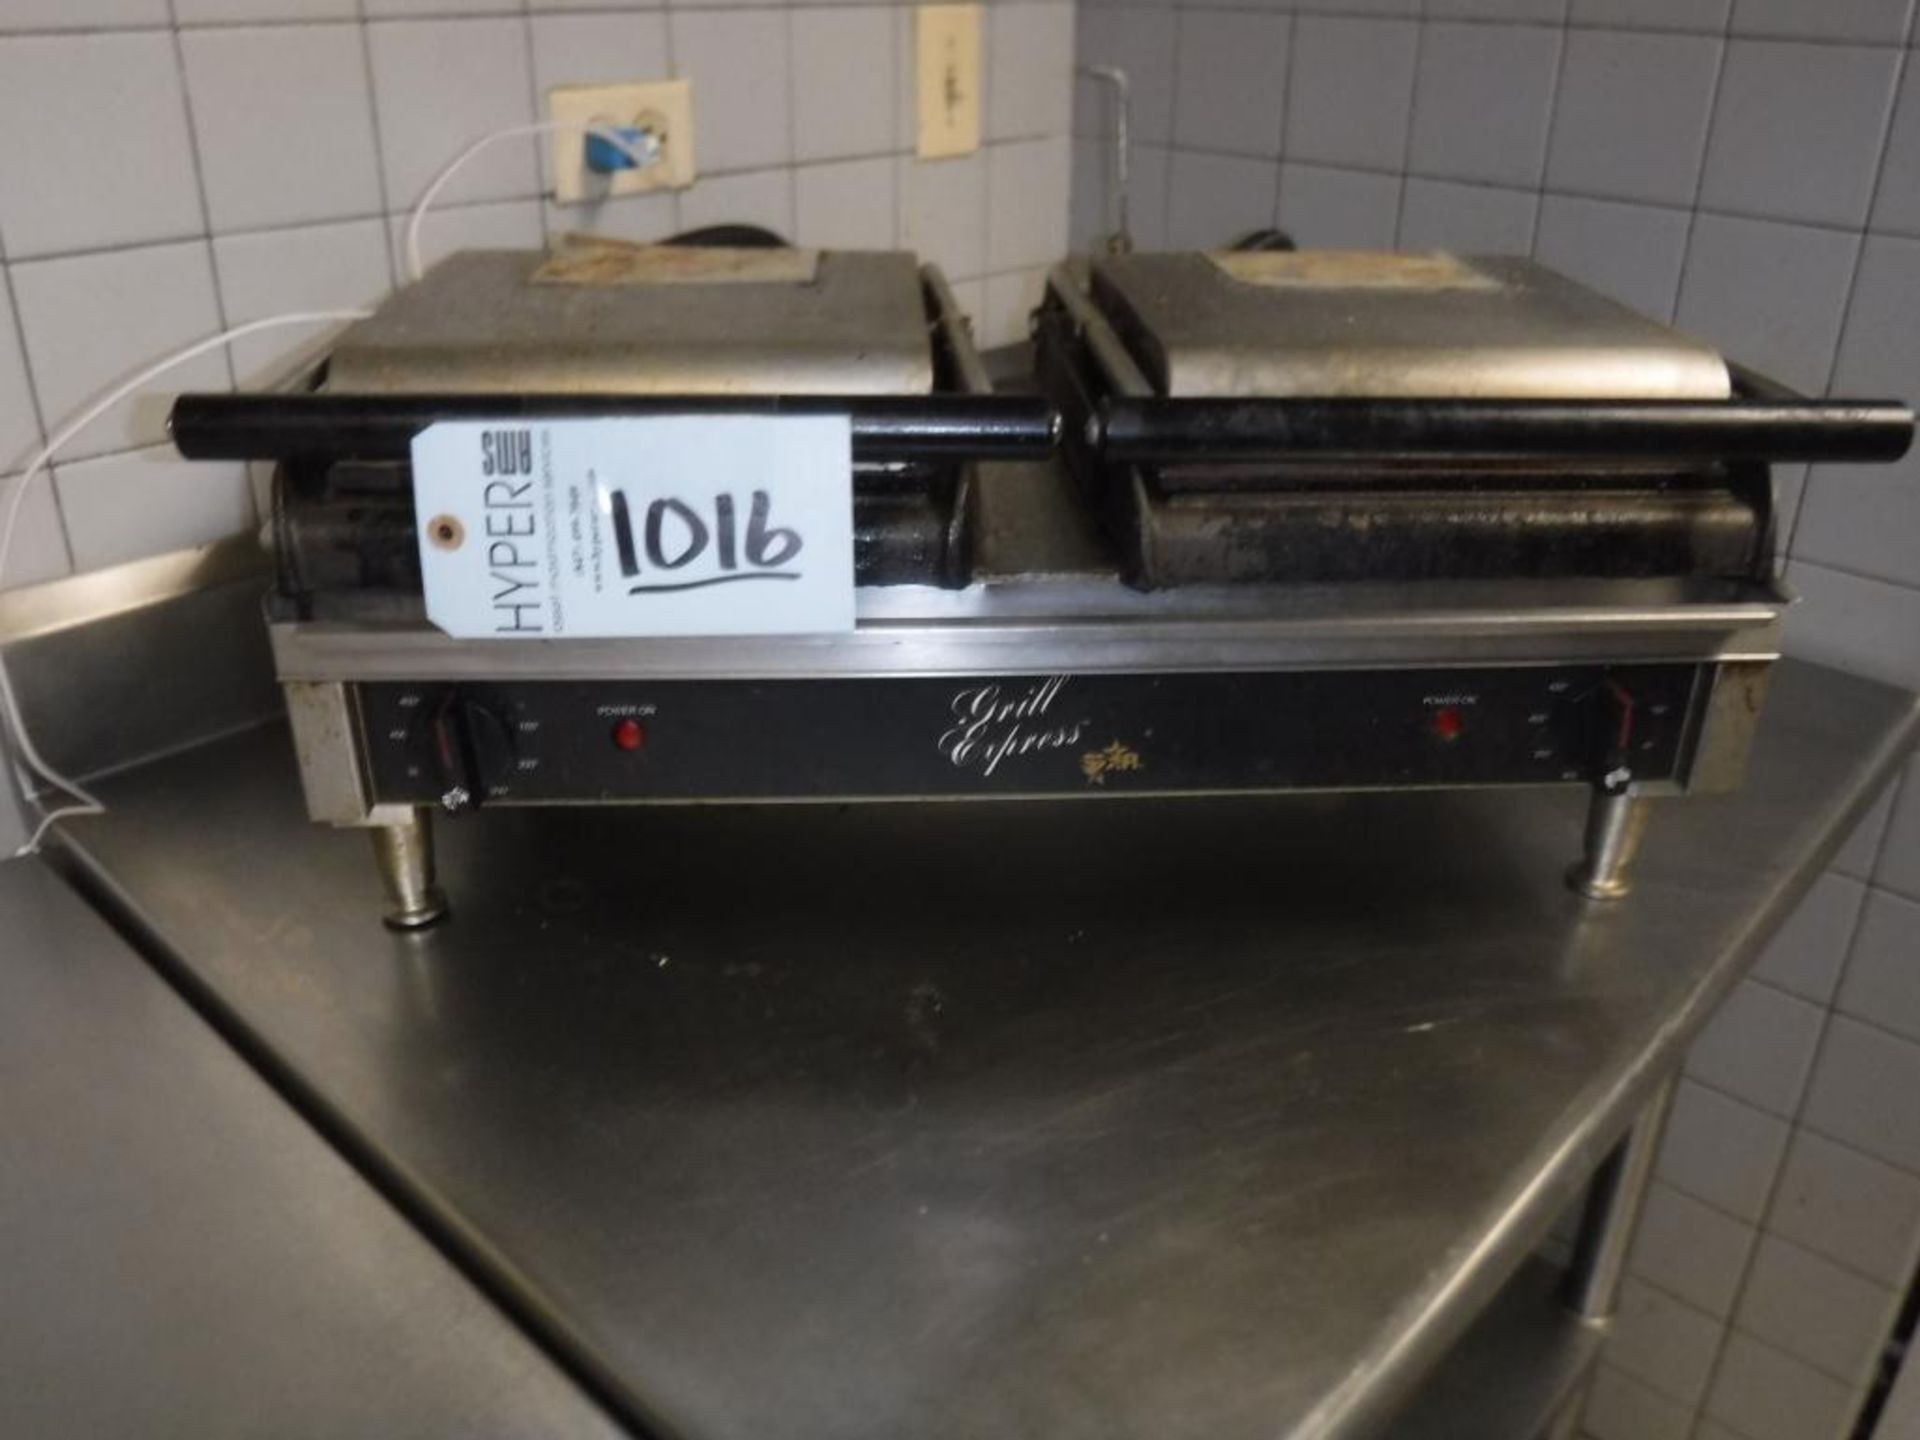 Grill Express Double Press Grill Model GX20IS, S/N GXS2007 1400282, With 3-Ft Stainless Table